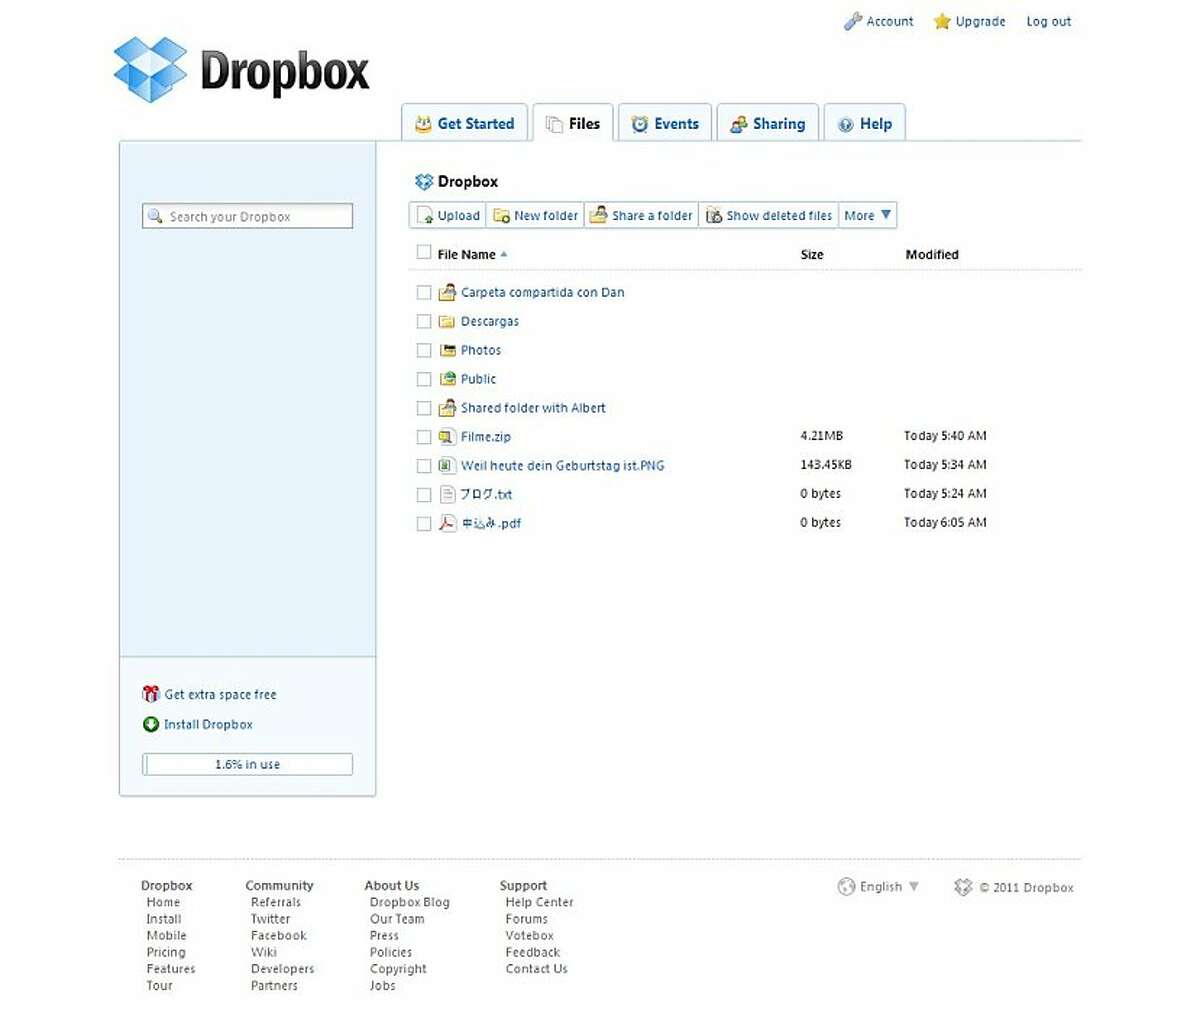 An image of Dropbox's web interface for sharing files via the cloud.